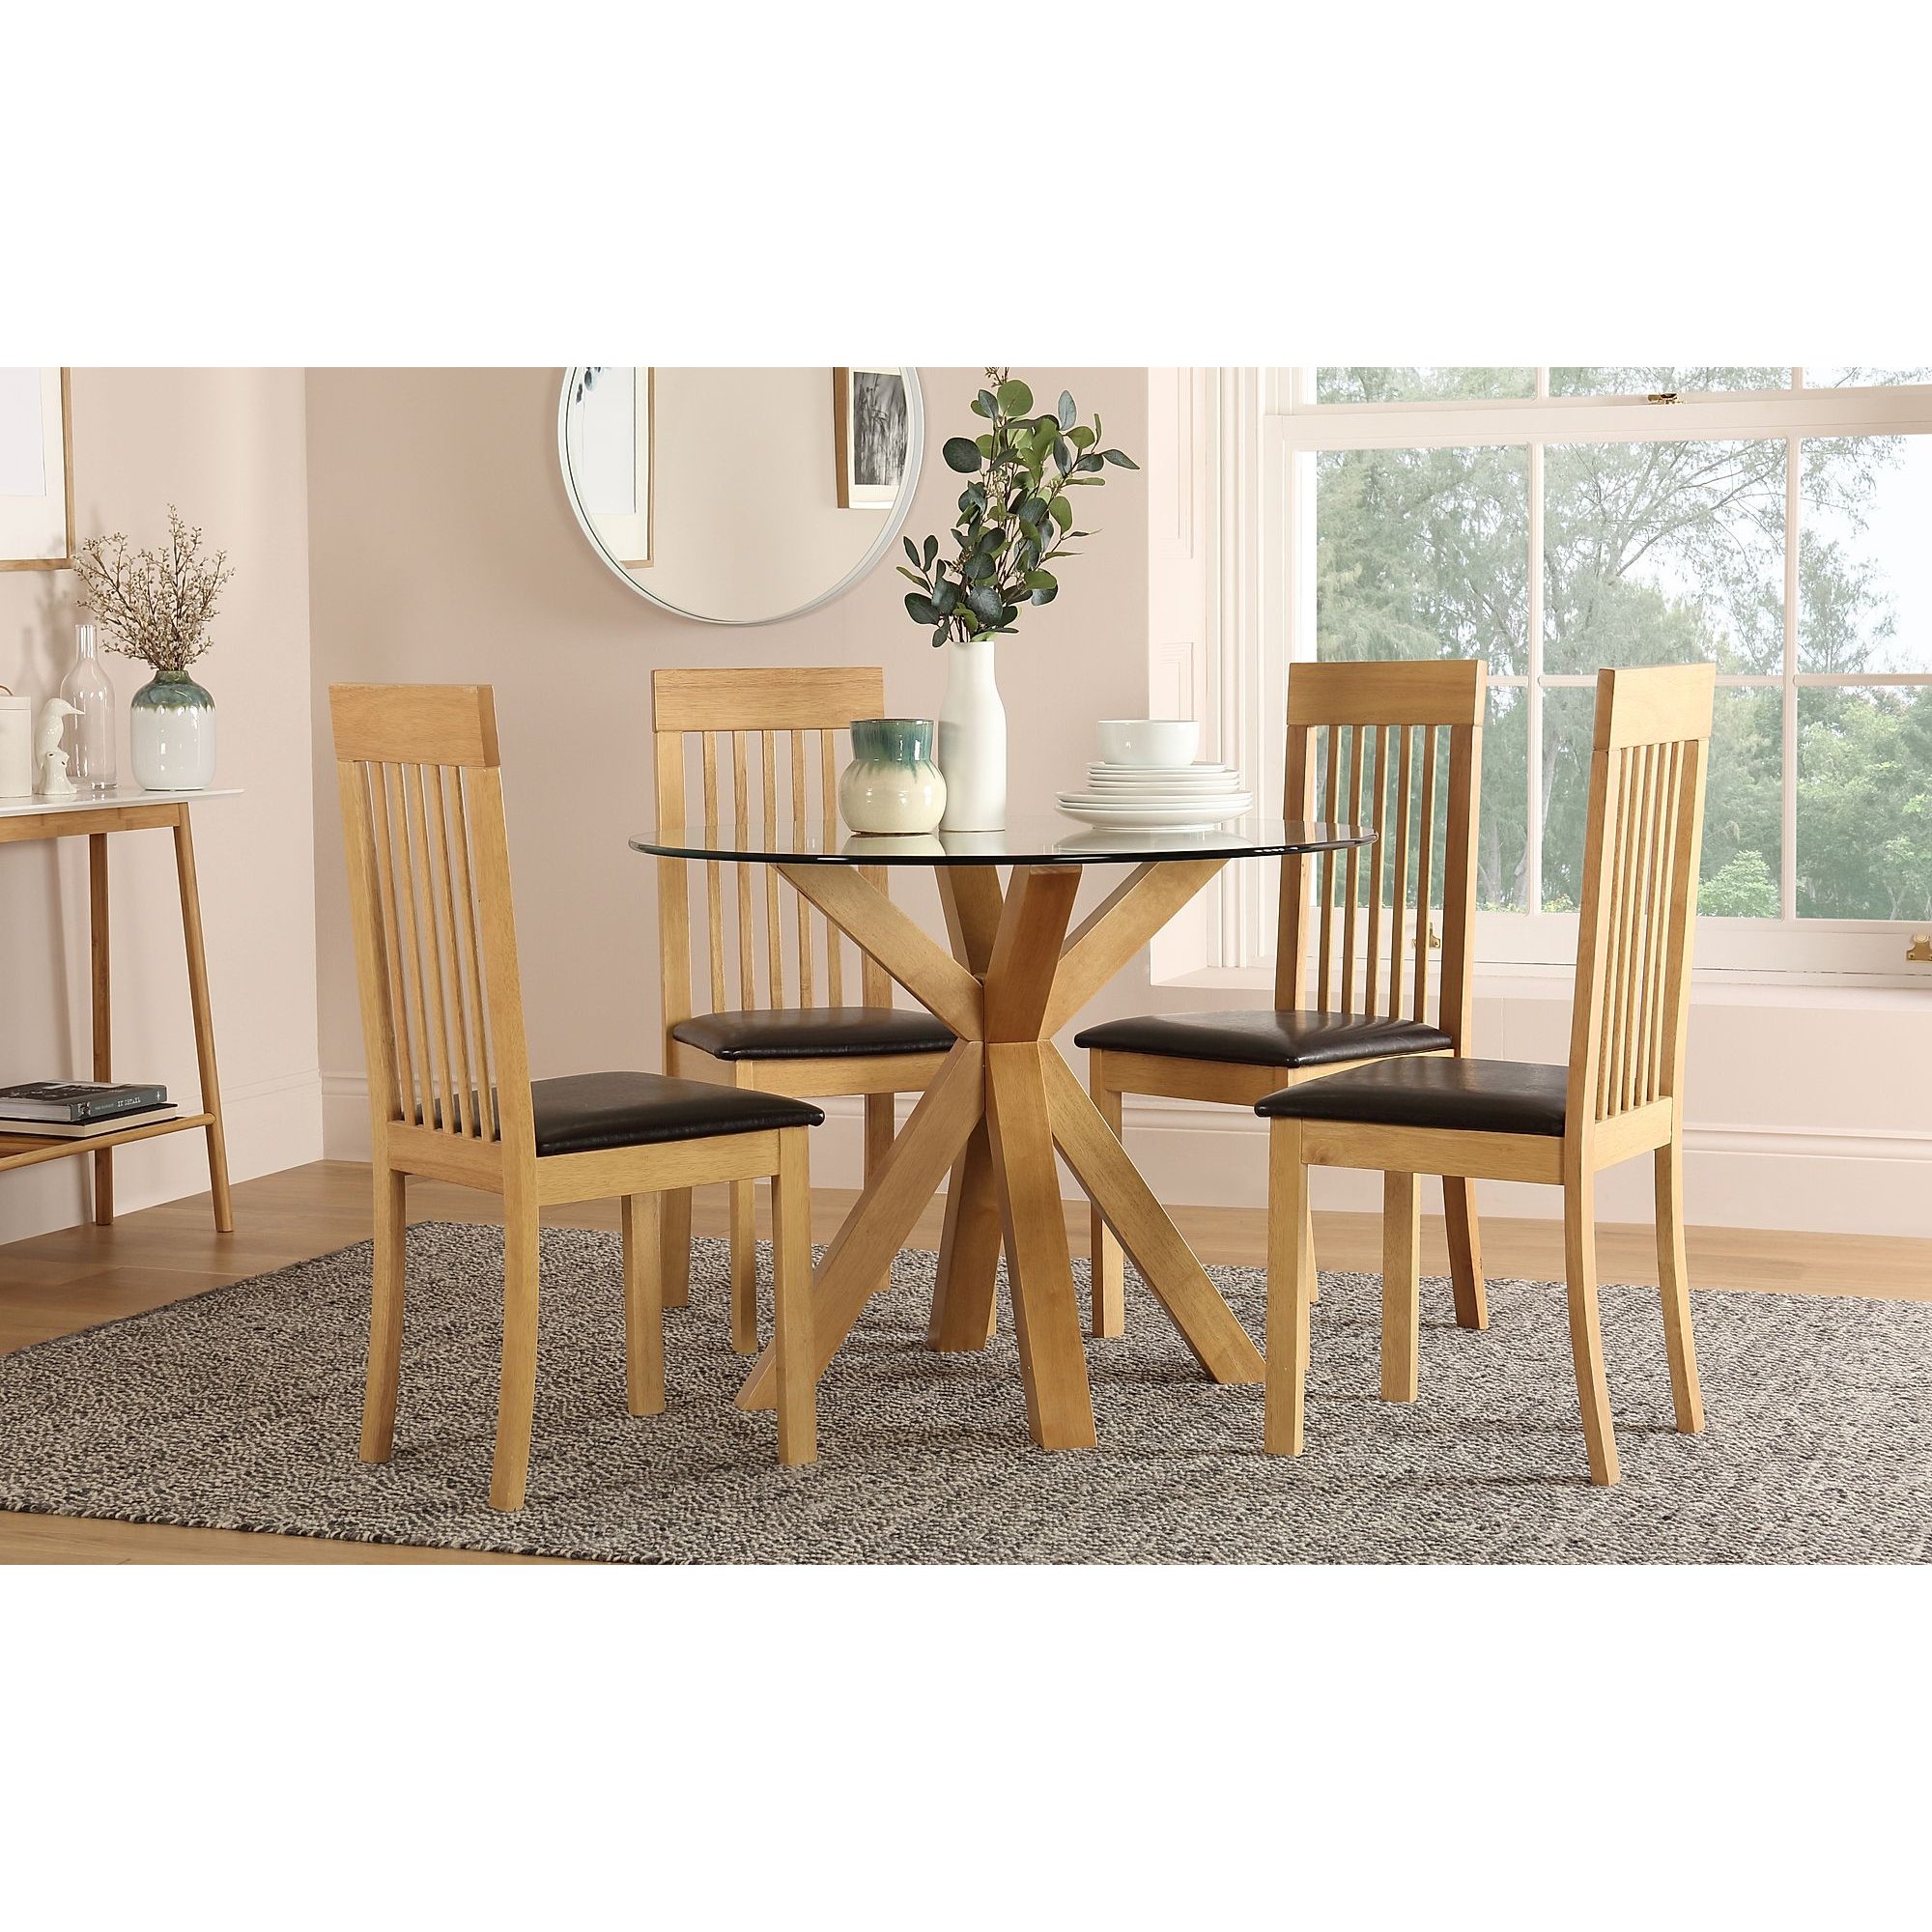 Hatton Round Oak and Glass Dining Table with 4 Oxford Chairs (Brown Leather Seat Pads)